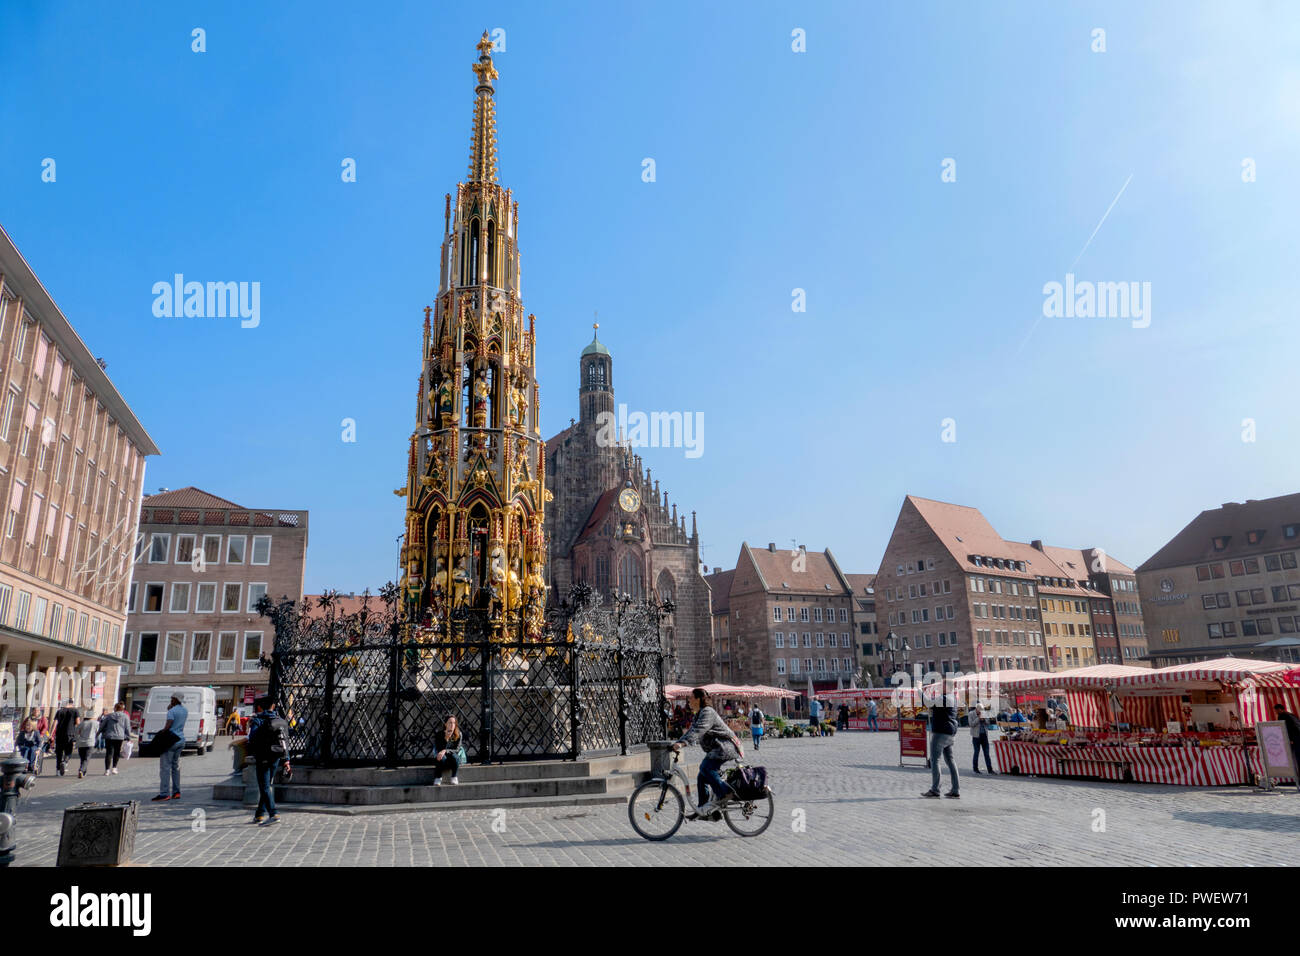 The 14th century fountain Schöner Brunnen in the main square of Nuremberg, Germany. Behind stands the Frauenkirche Church. Stock Photo